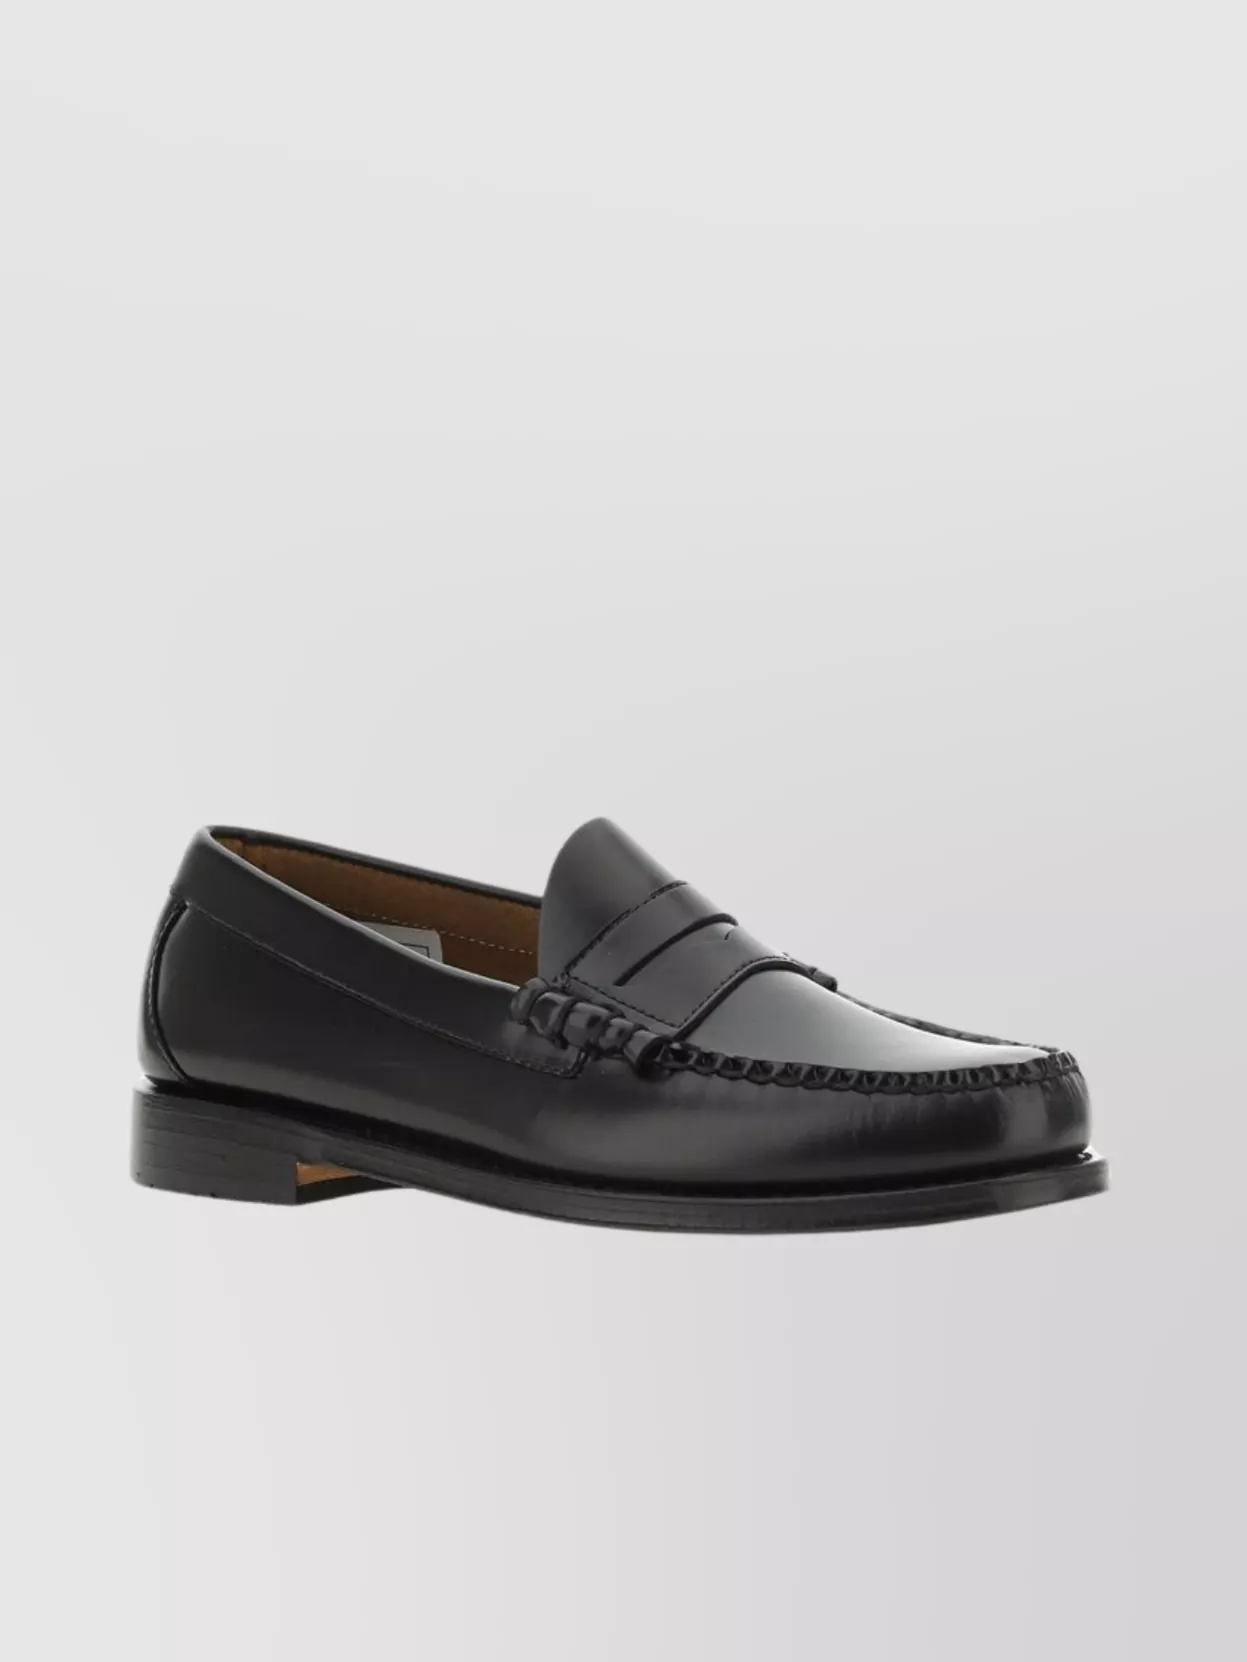 Shop Gh Bass Penny Loafer With Low Block Heel And Moc Toe